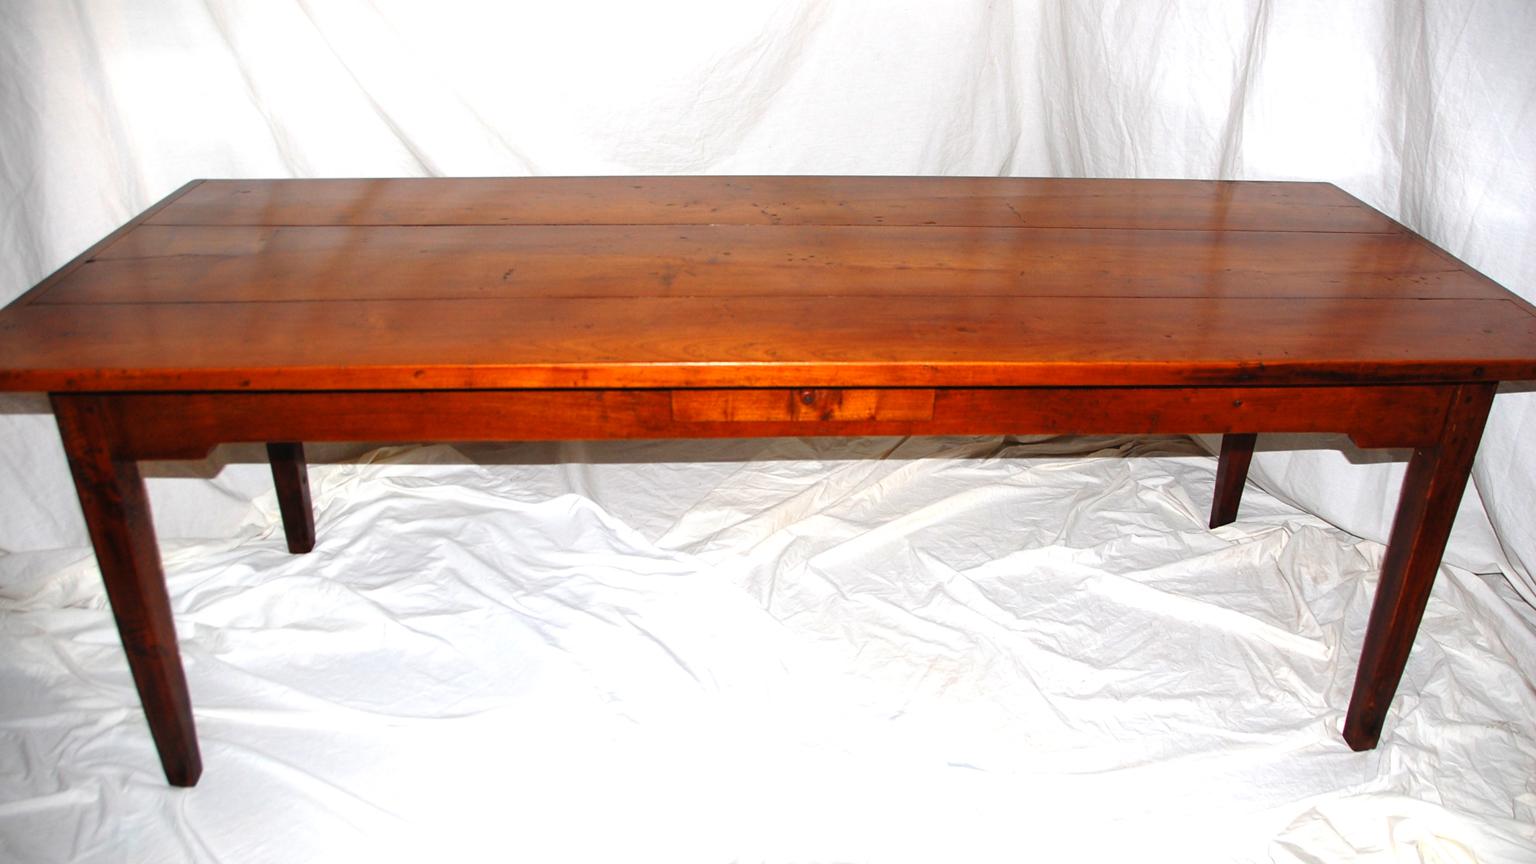 French cherry long farm house table, 89 inches in length with a thick three plank cherry top, cherry squared tapered and molded legs, breadboard ends, peg and tenoned construction. This Normandy classic that has been restored and is ready for use.